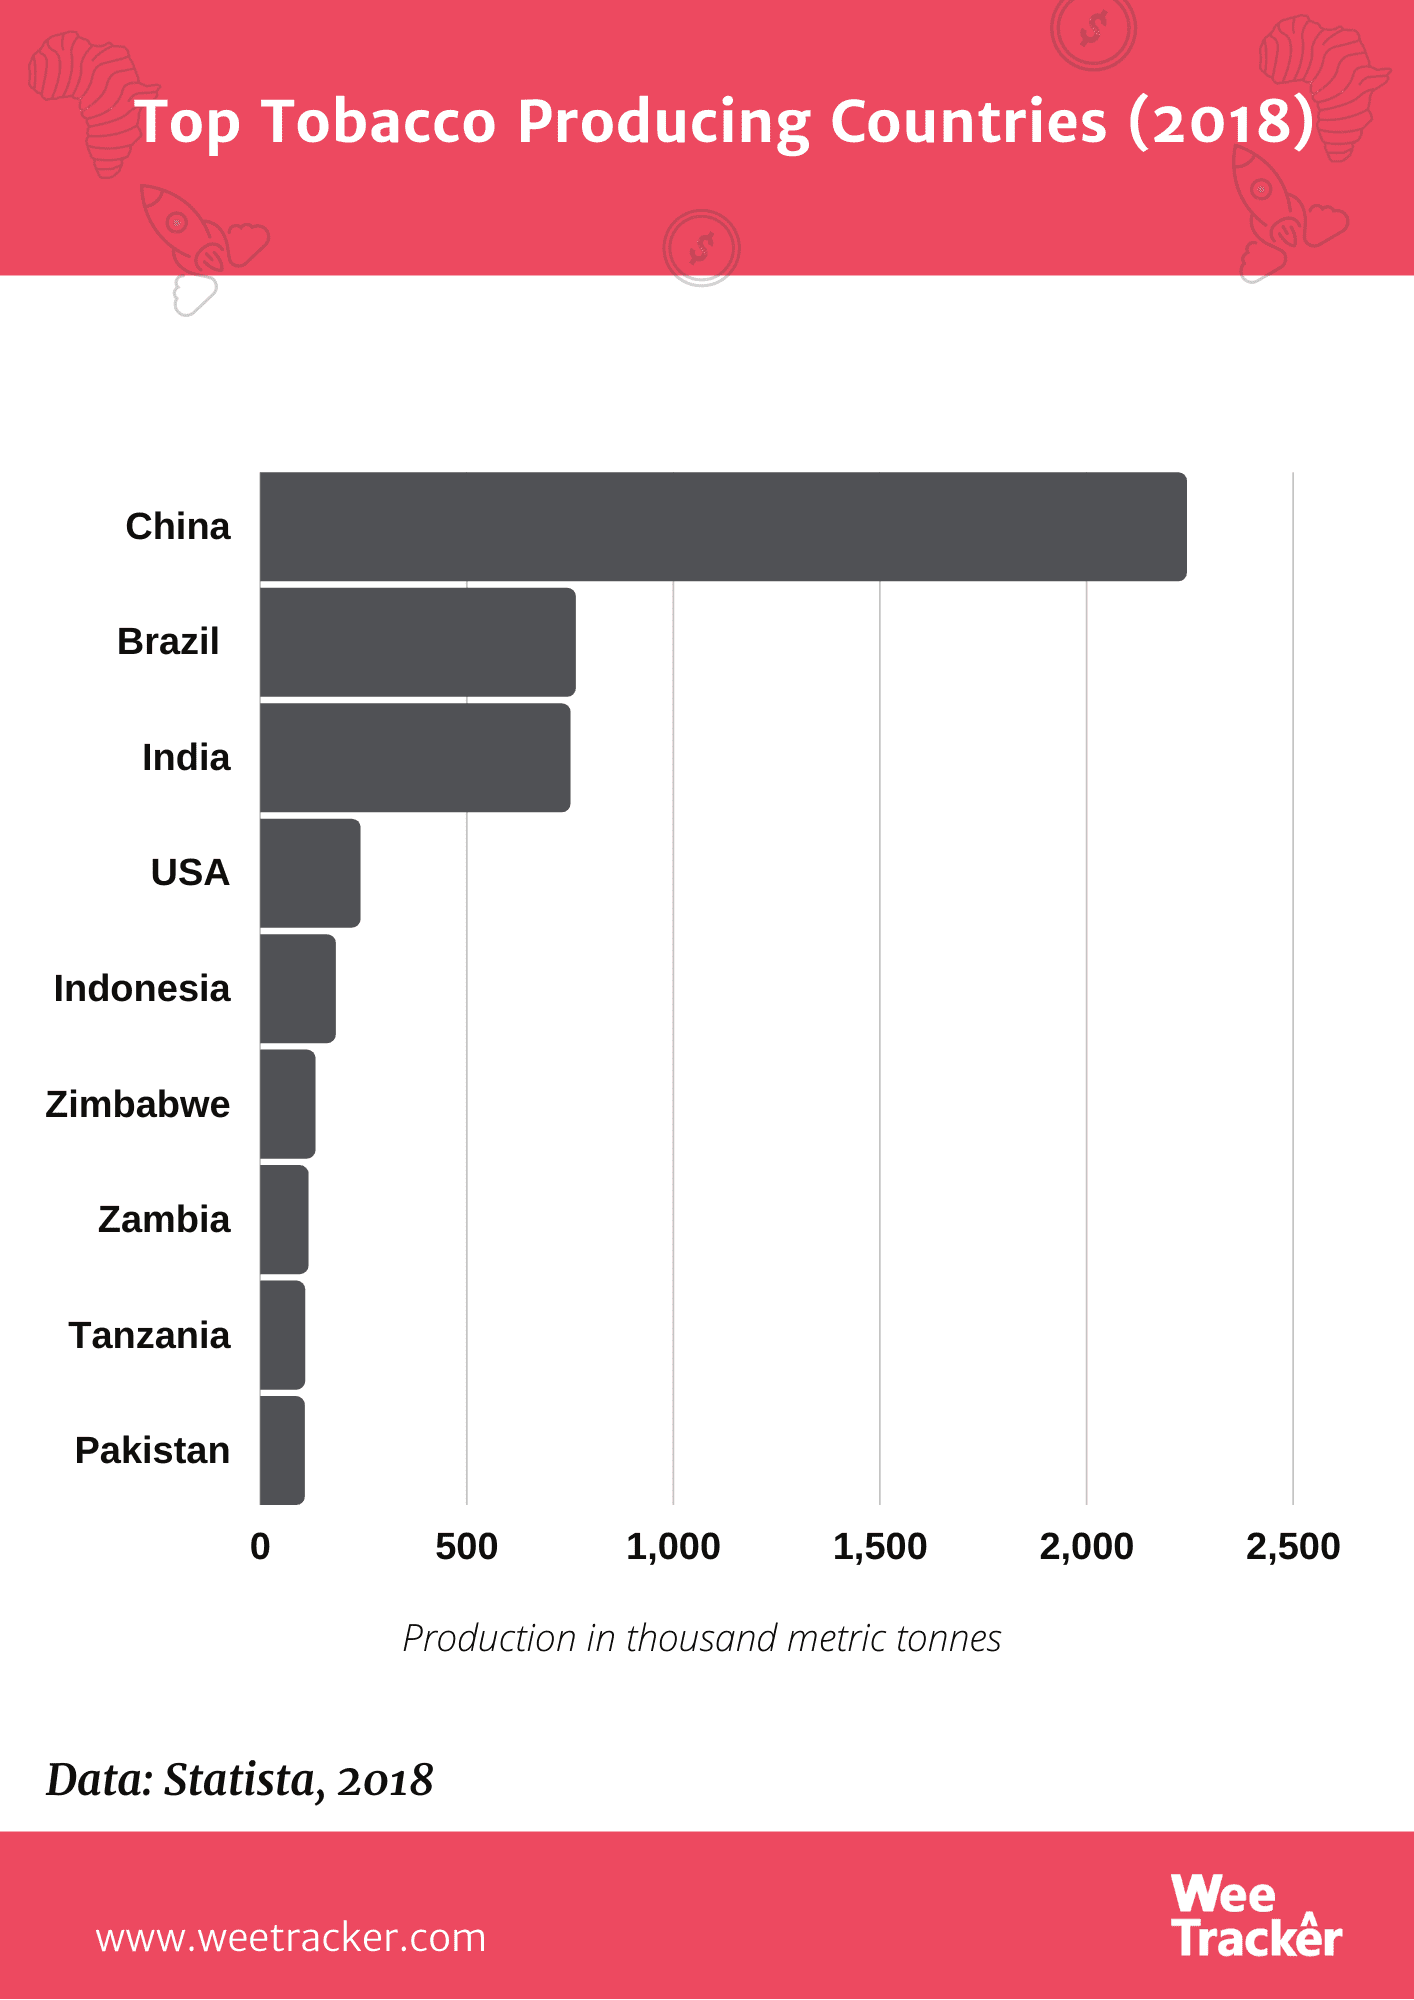 https://weetracker.com/wp-content/uploads/2020/05/Top-Tobacco-Producing-Countries-2018.png